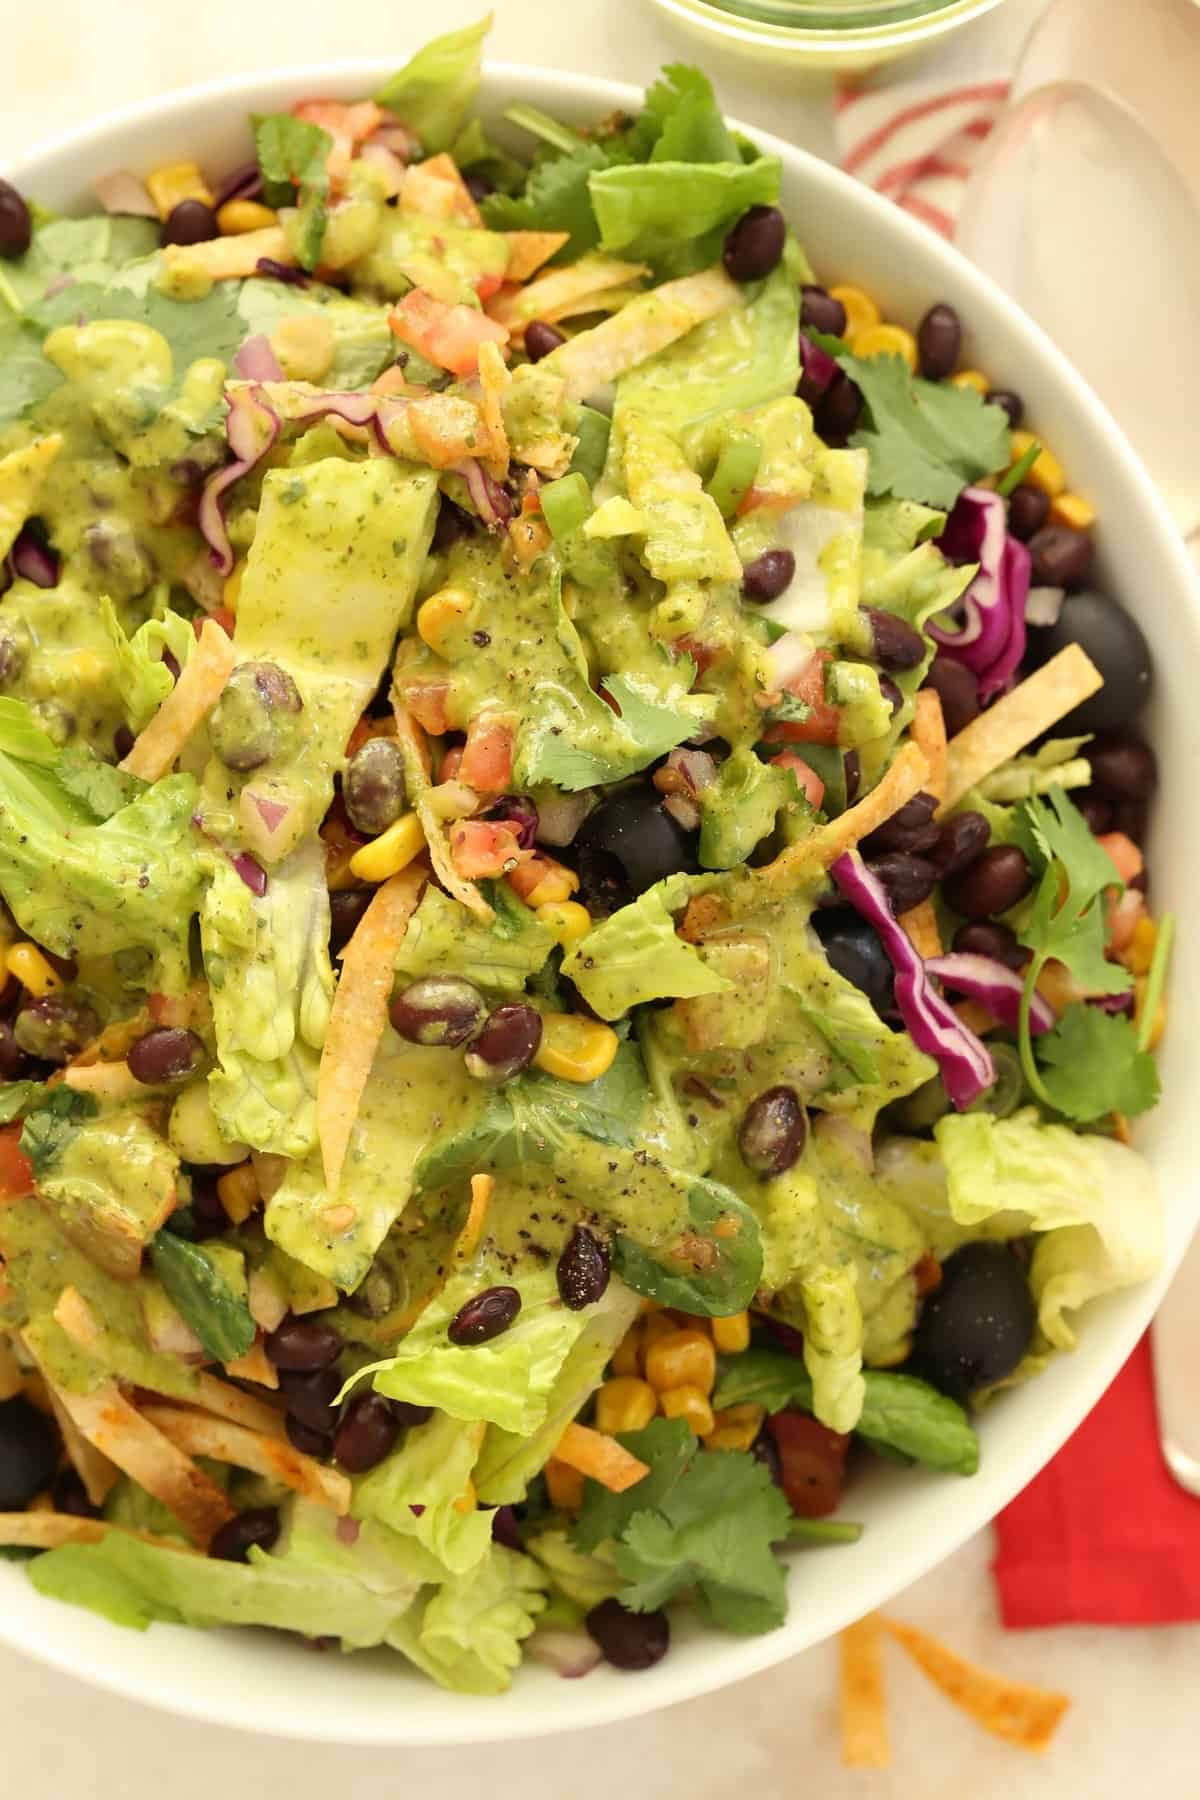 Vegetarian Mexican Chopped Salad - The Harvest Kitchen